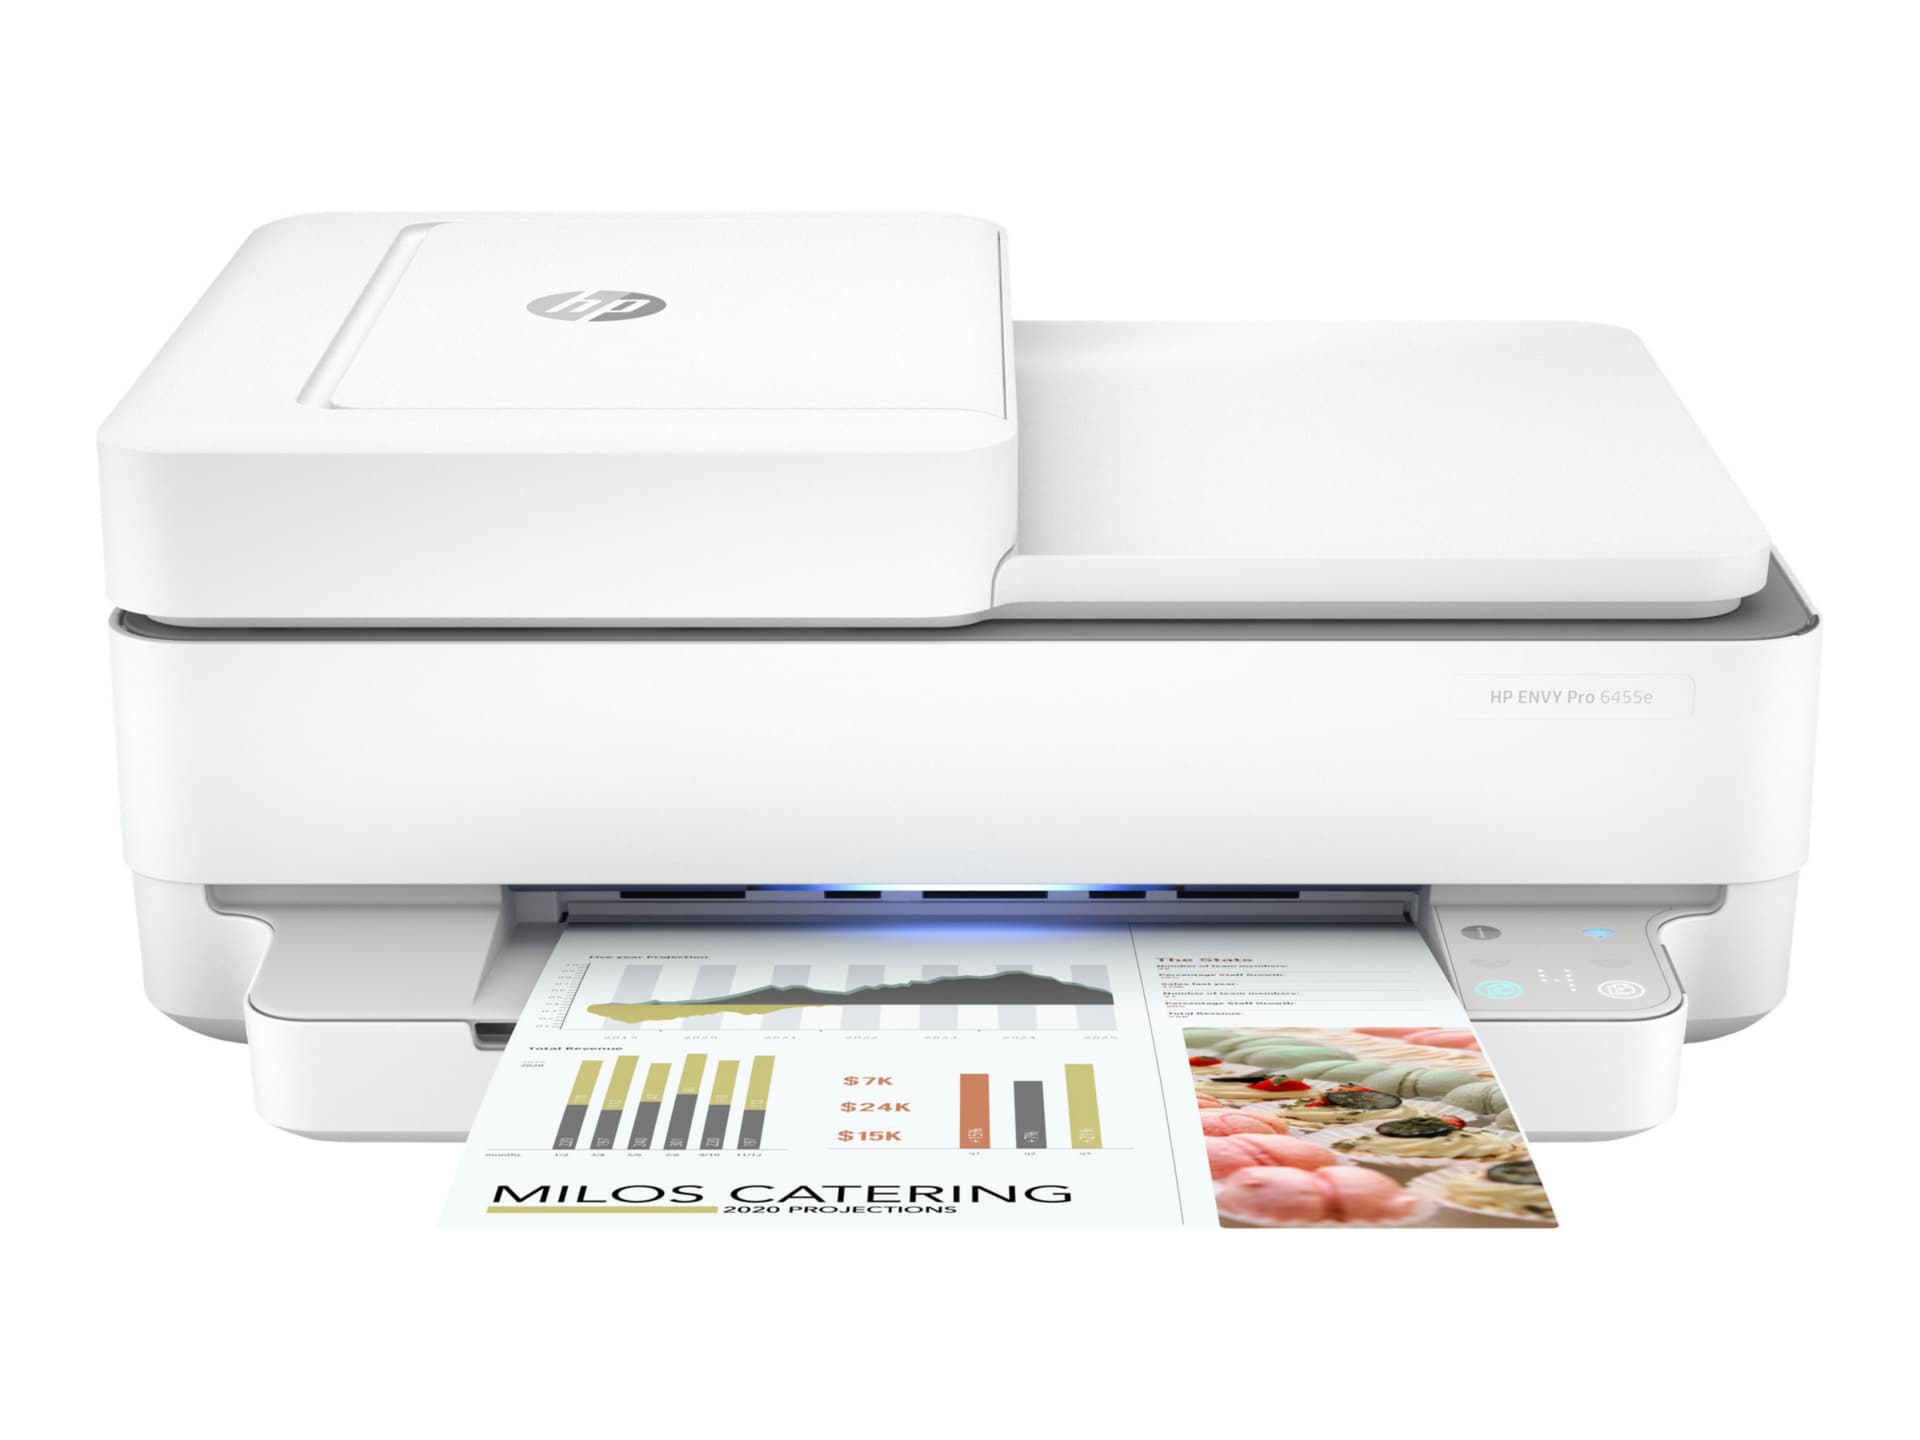 voorzetsel bronzen borst HP ENVY Pro 6455e All-in-One - multifunction printer - color - HP Instant  Ink eligible - 223R1A#B1H - All-in-One Printers - CDW.com